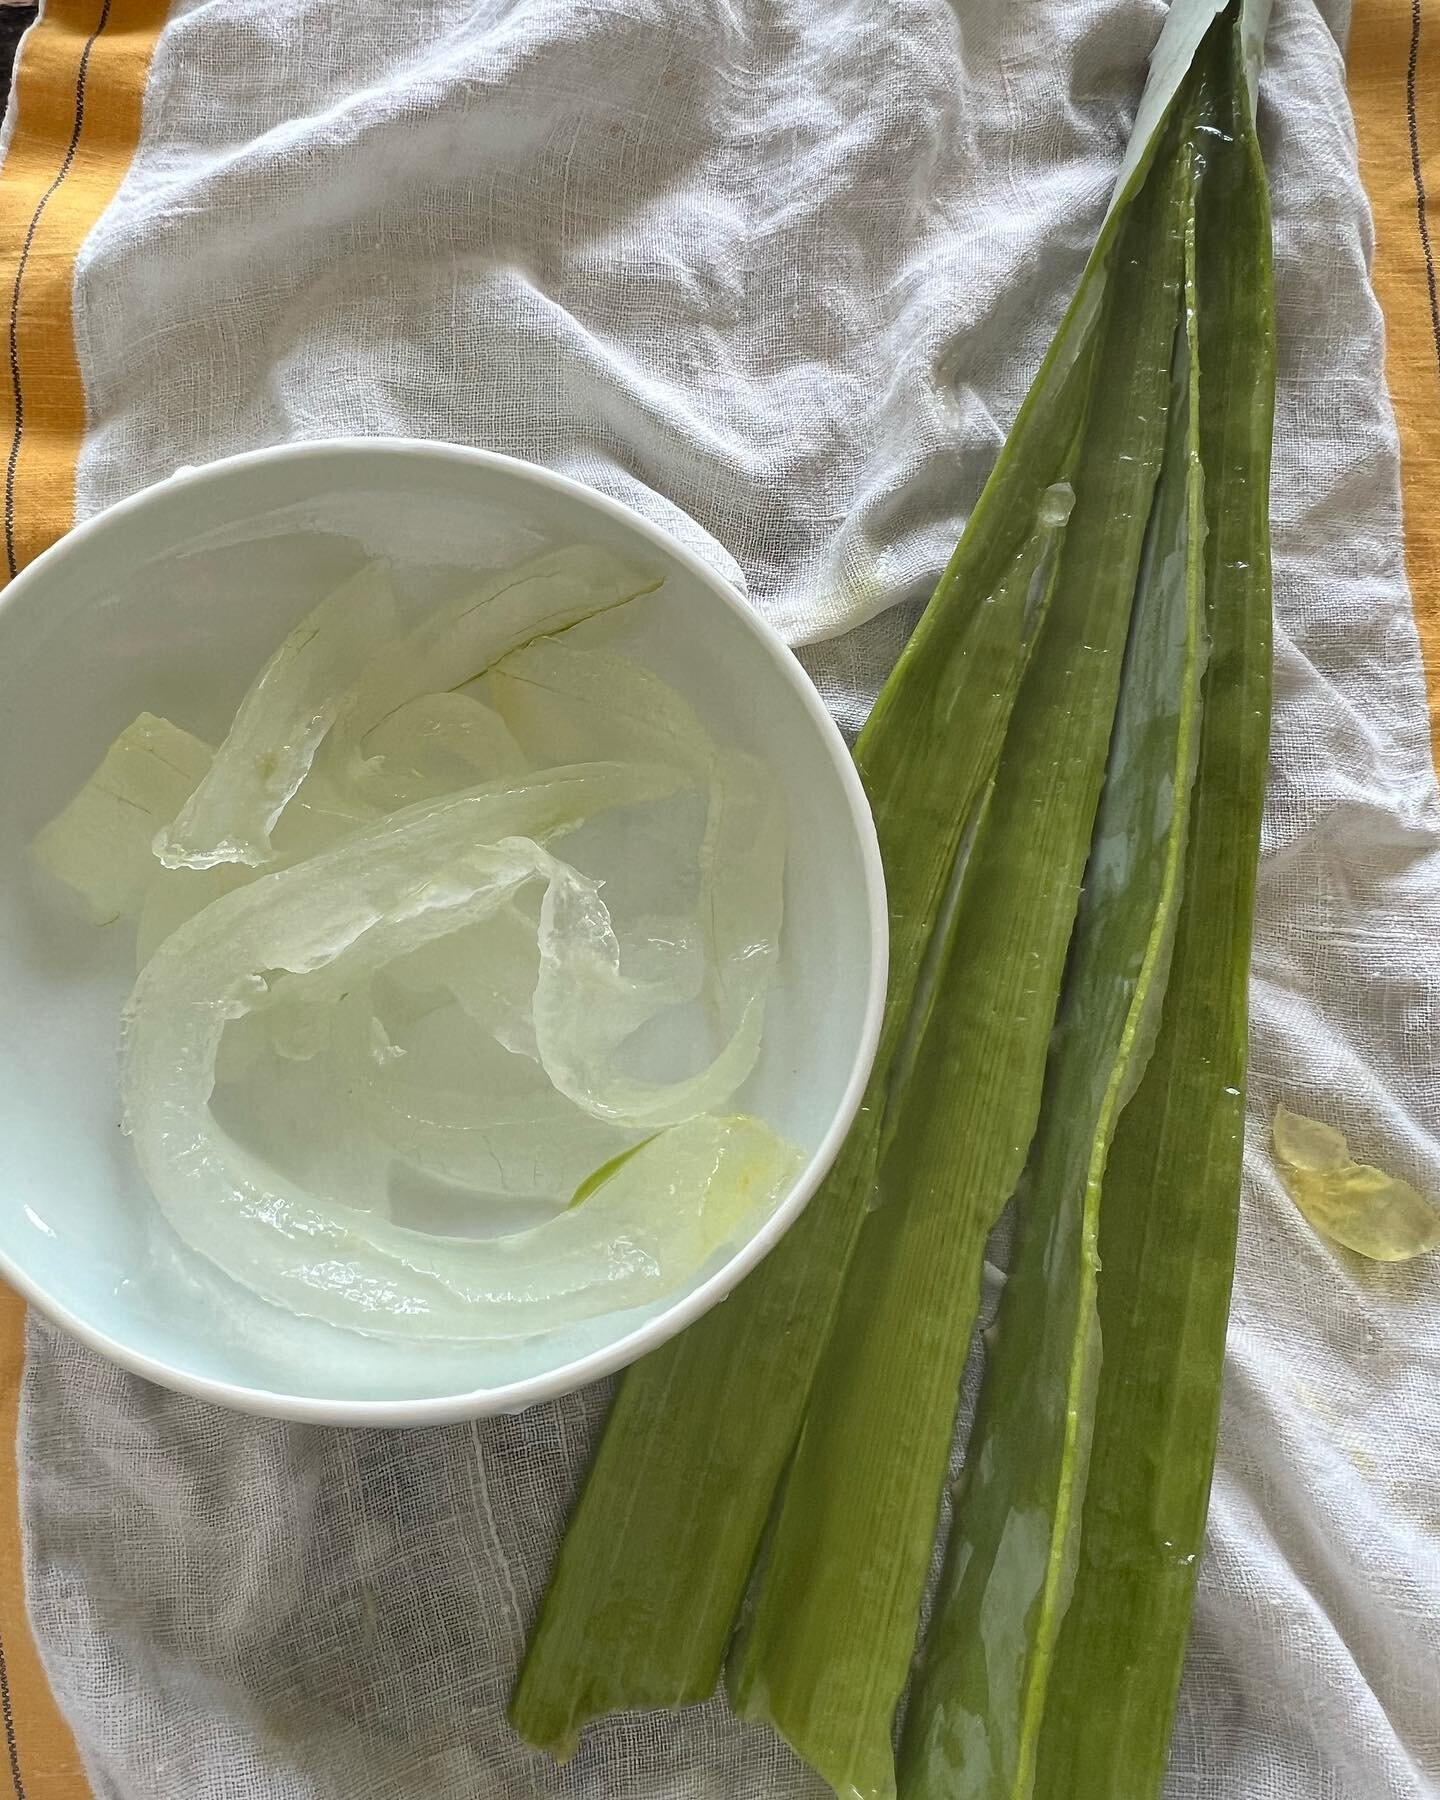 When the heat is on it&rsquo;s time for aloe!  Easy to scrape out the gel and use to make heavenly skin masques and spritzes. Put some in a blender with cucumber, mint and water for internal cellular moisture.